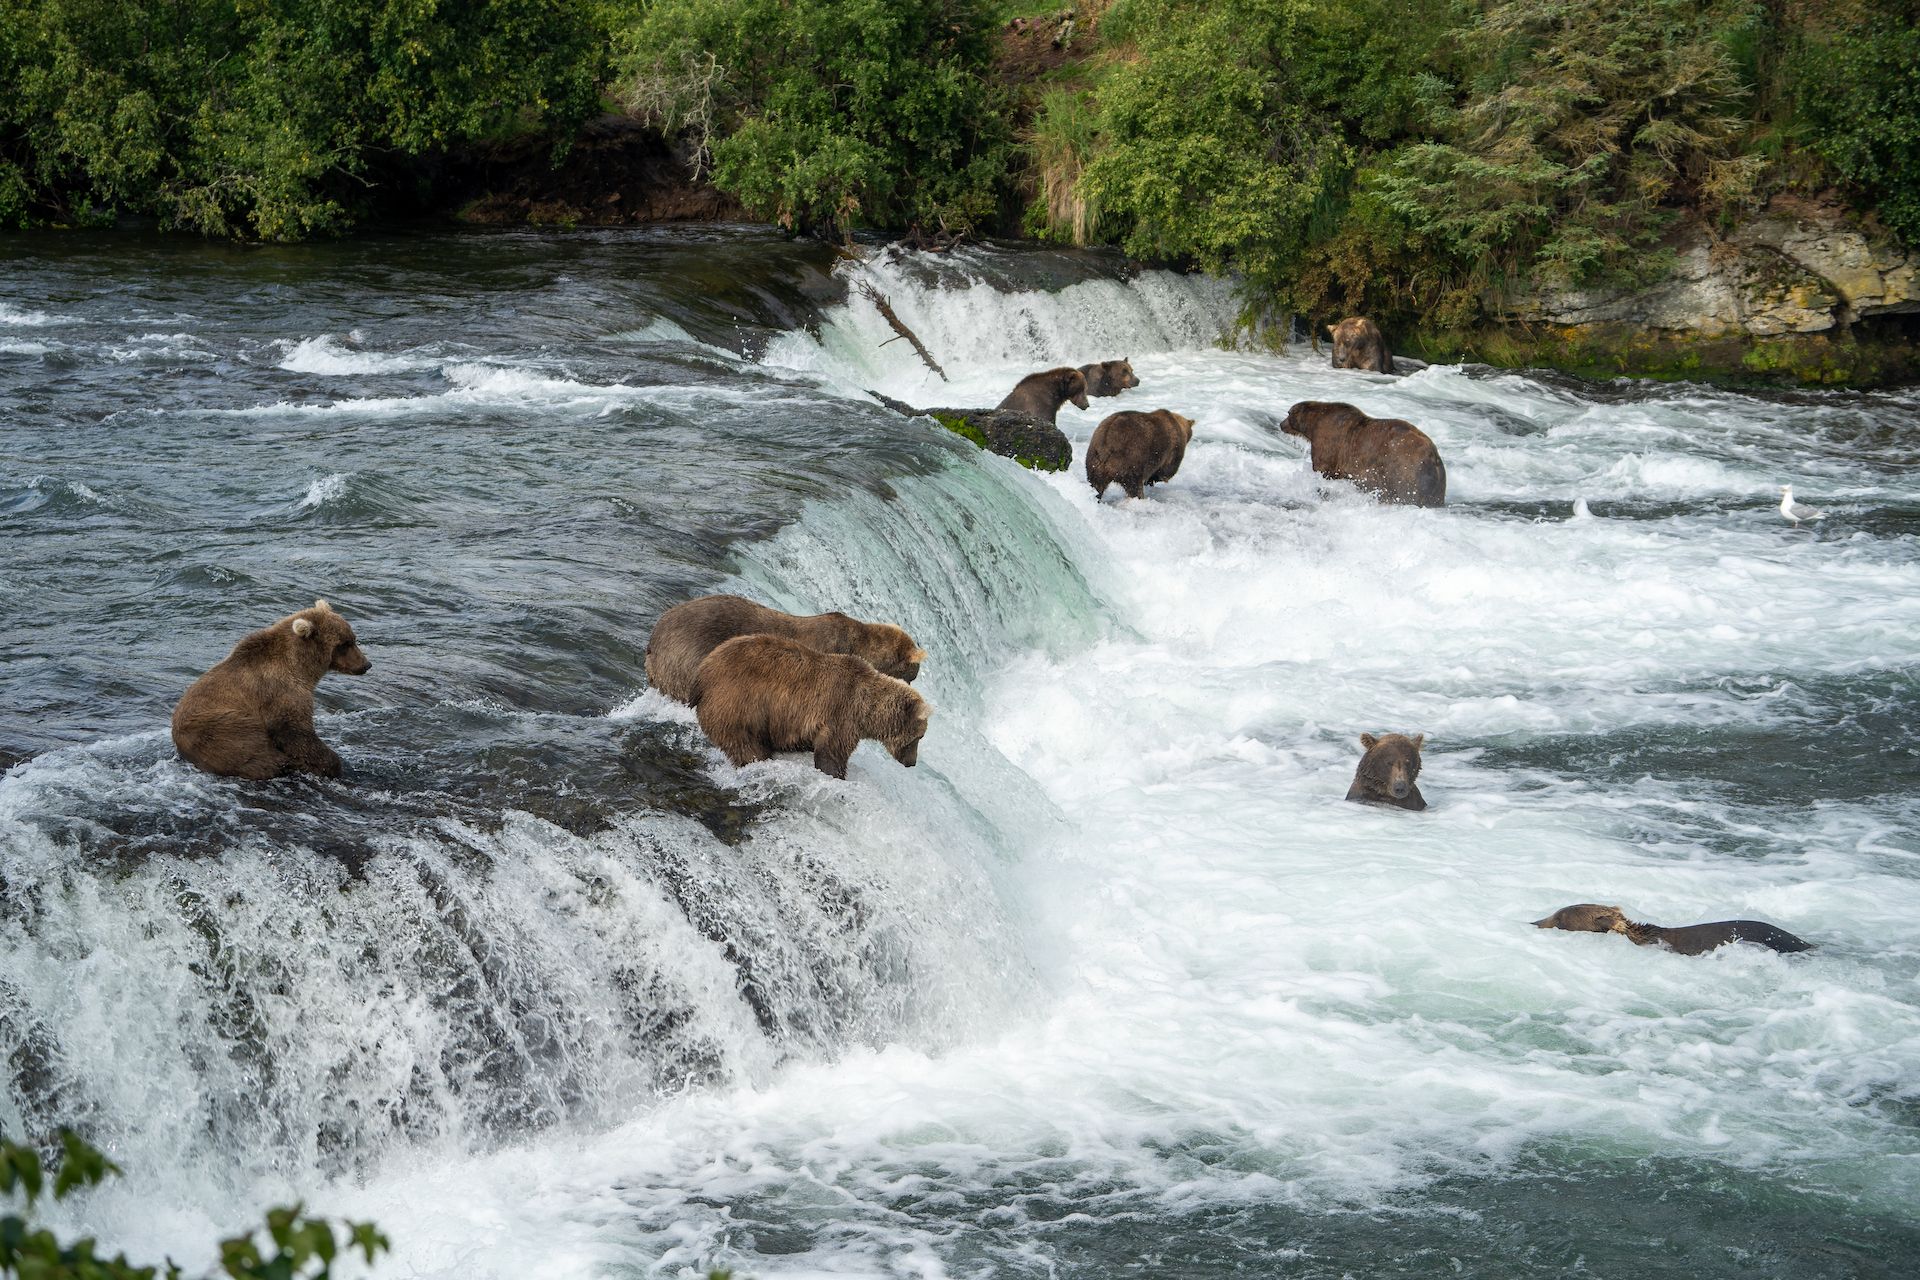 We spent several hours at this platform during our stay in Katmai, and saw between 10 to 25 bears fishing at any given time.